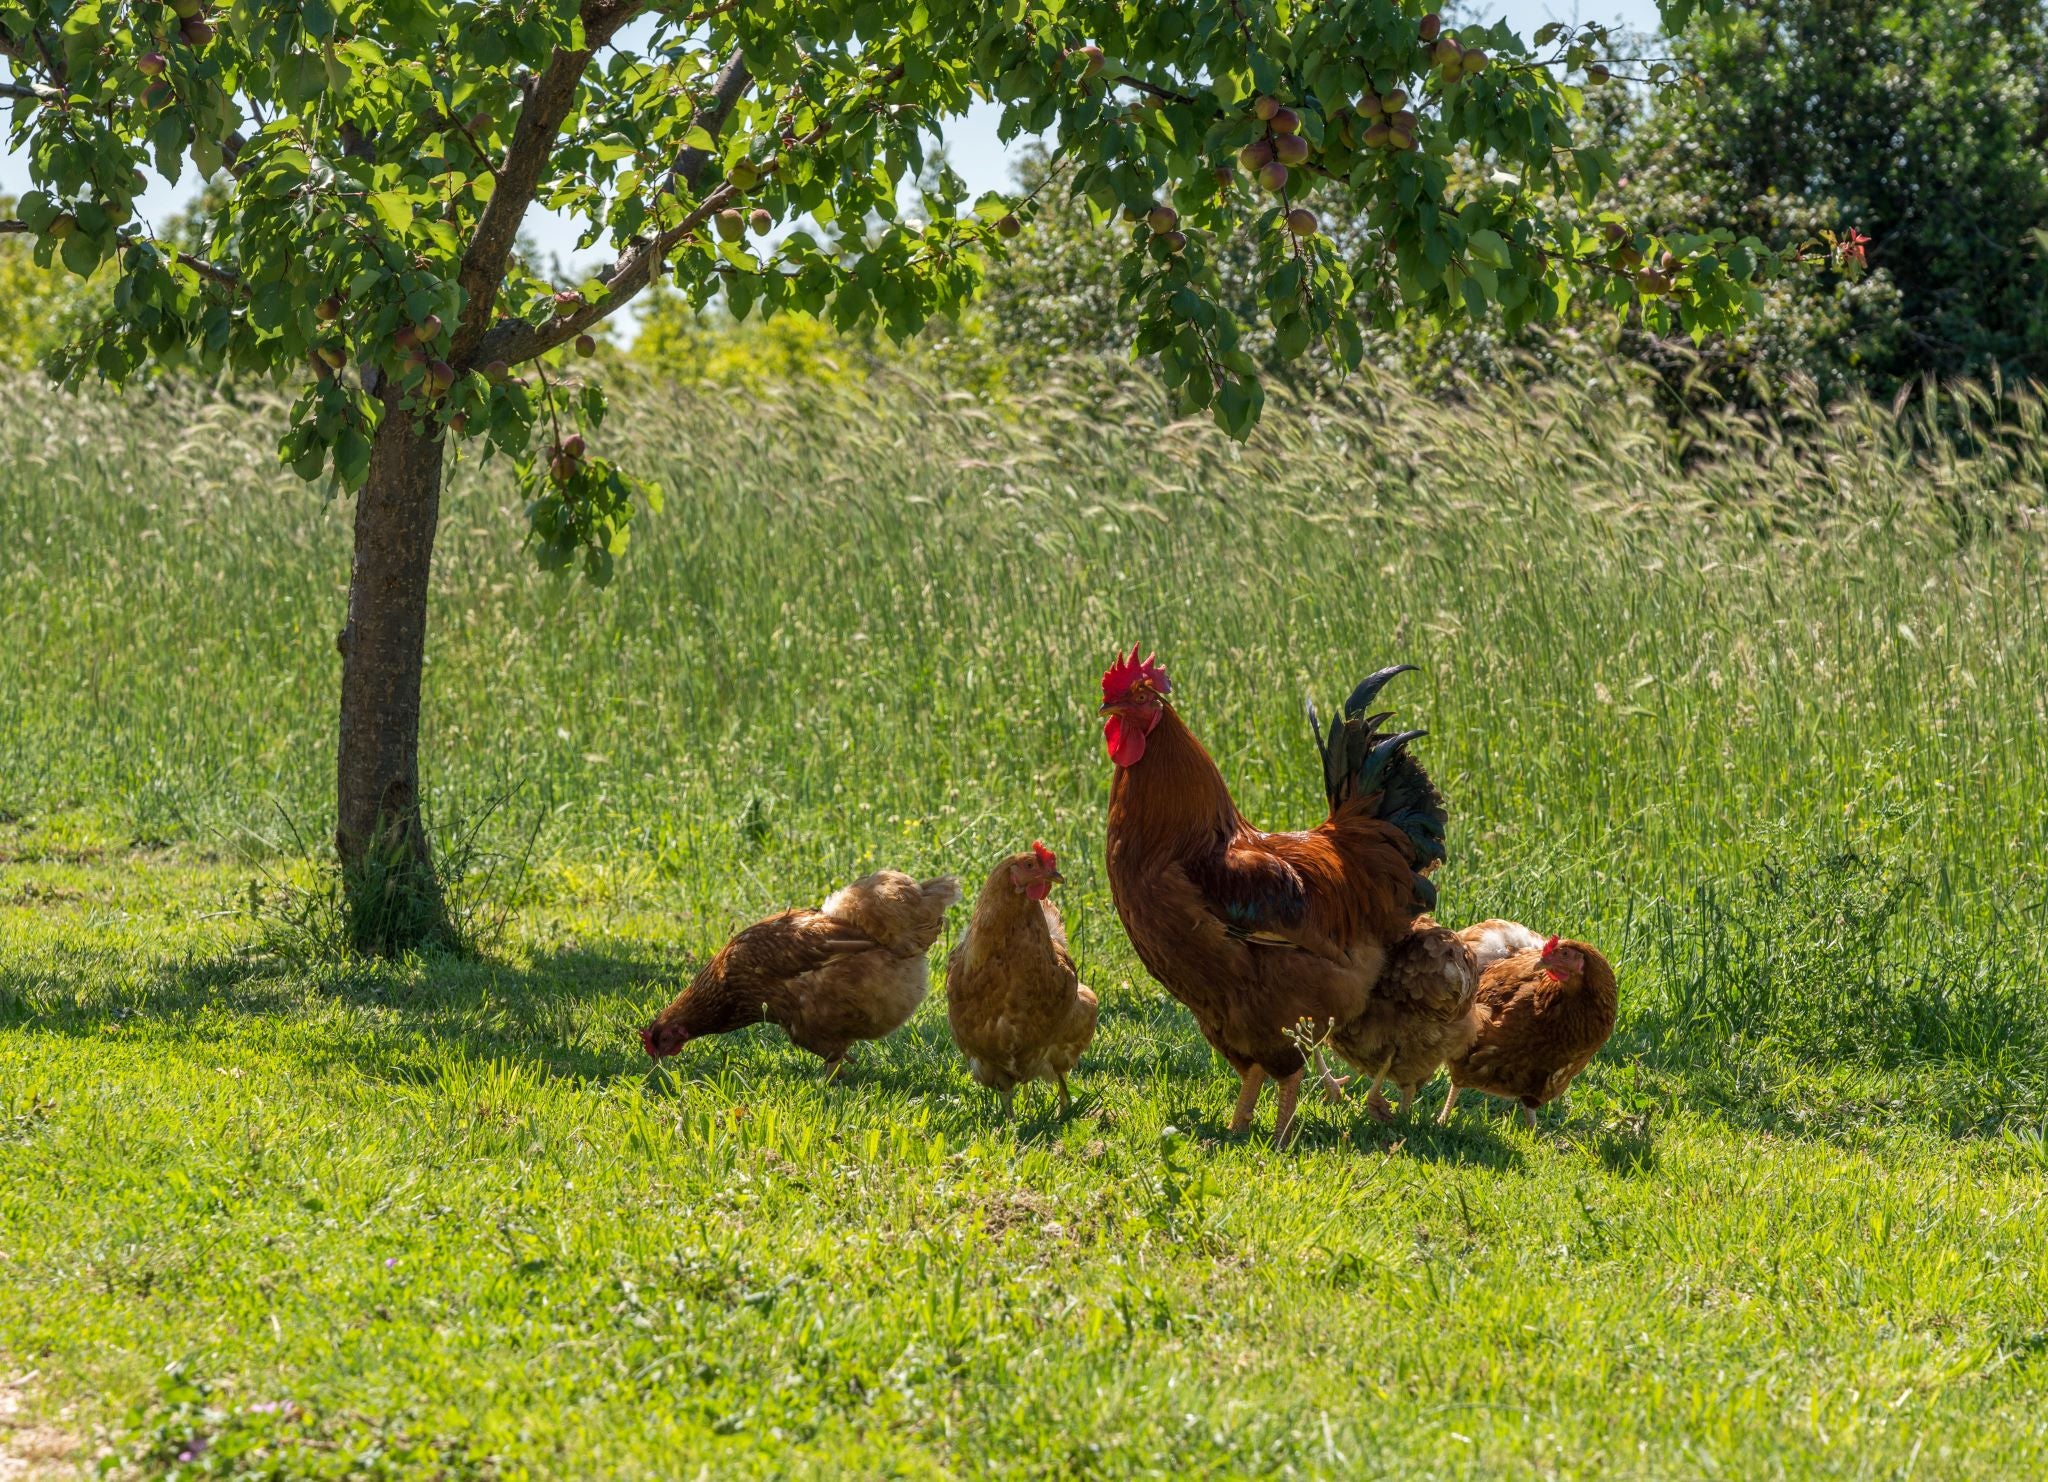 A rooster and three hens foraging under a tree.